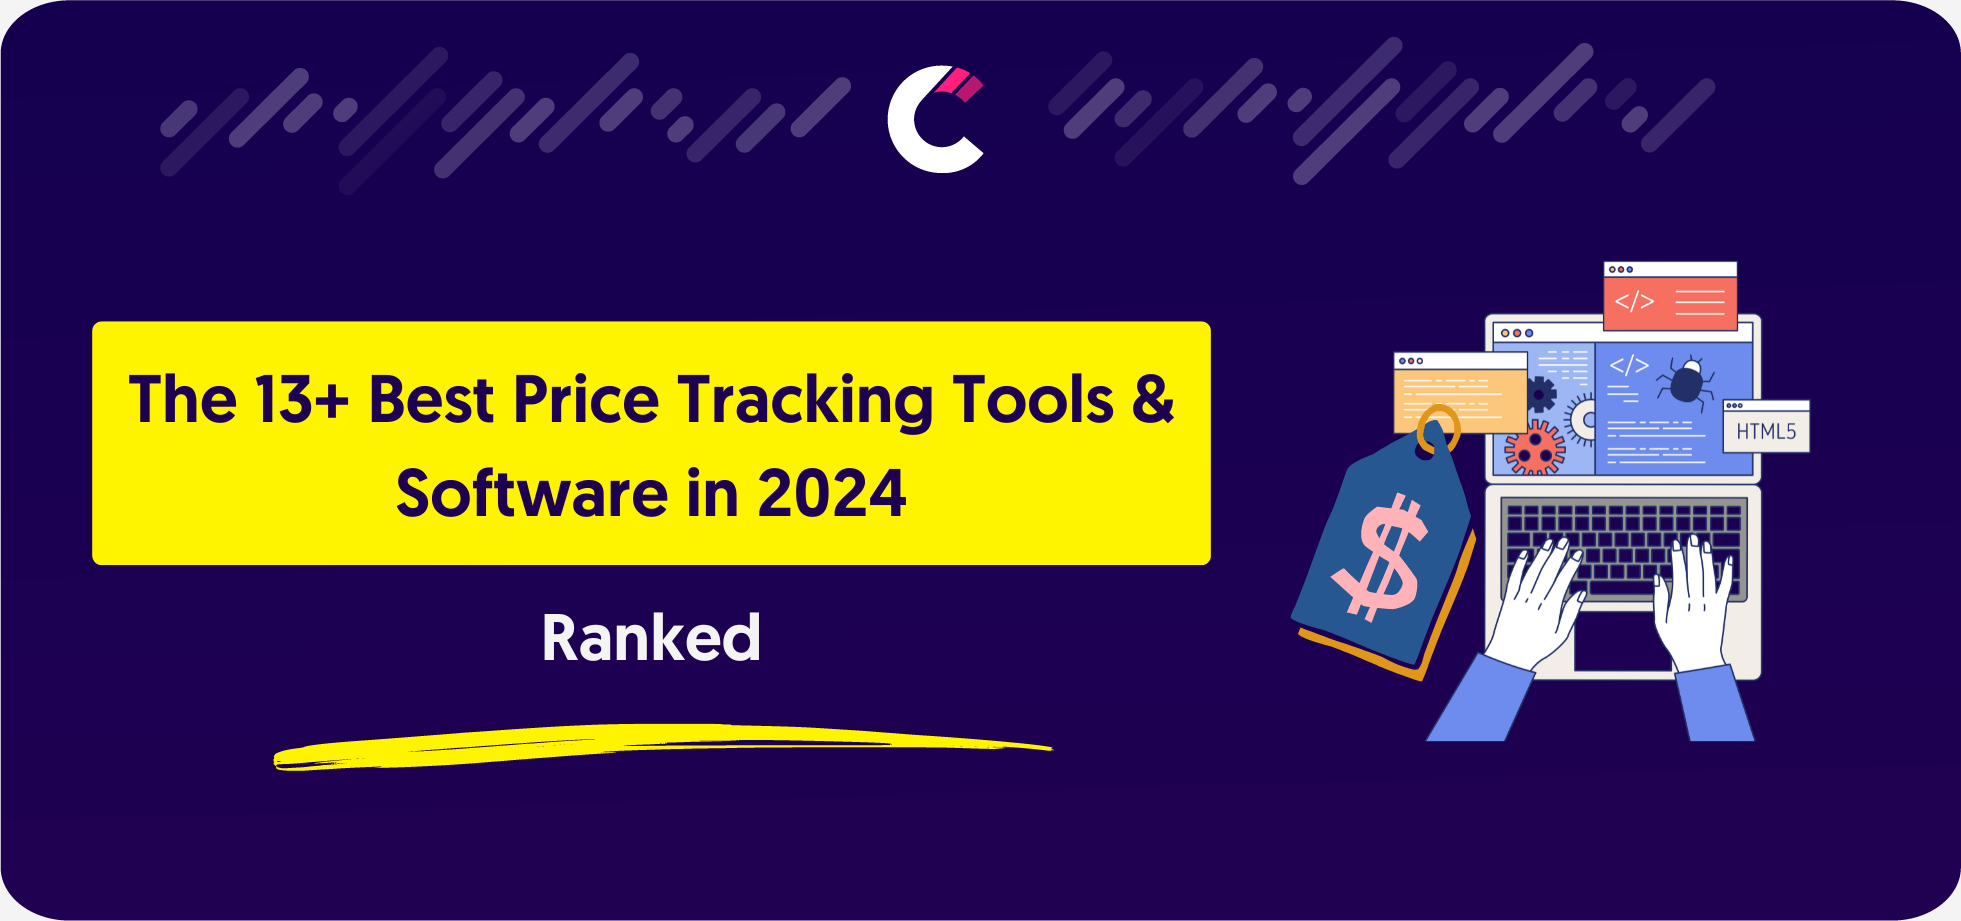 The 13+ Best Price Tracking Tools & Software in 2024 Ranked